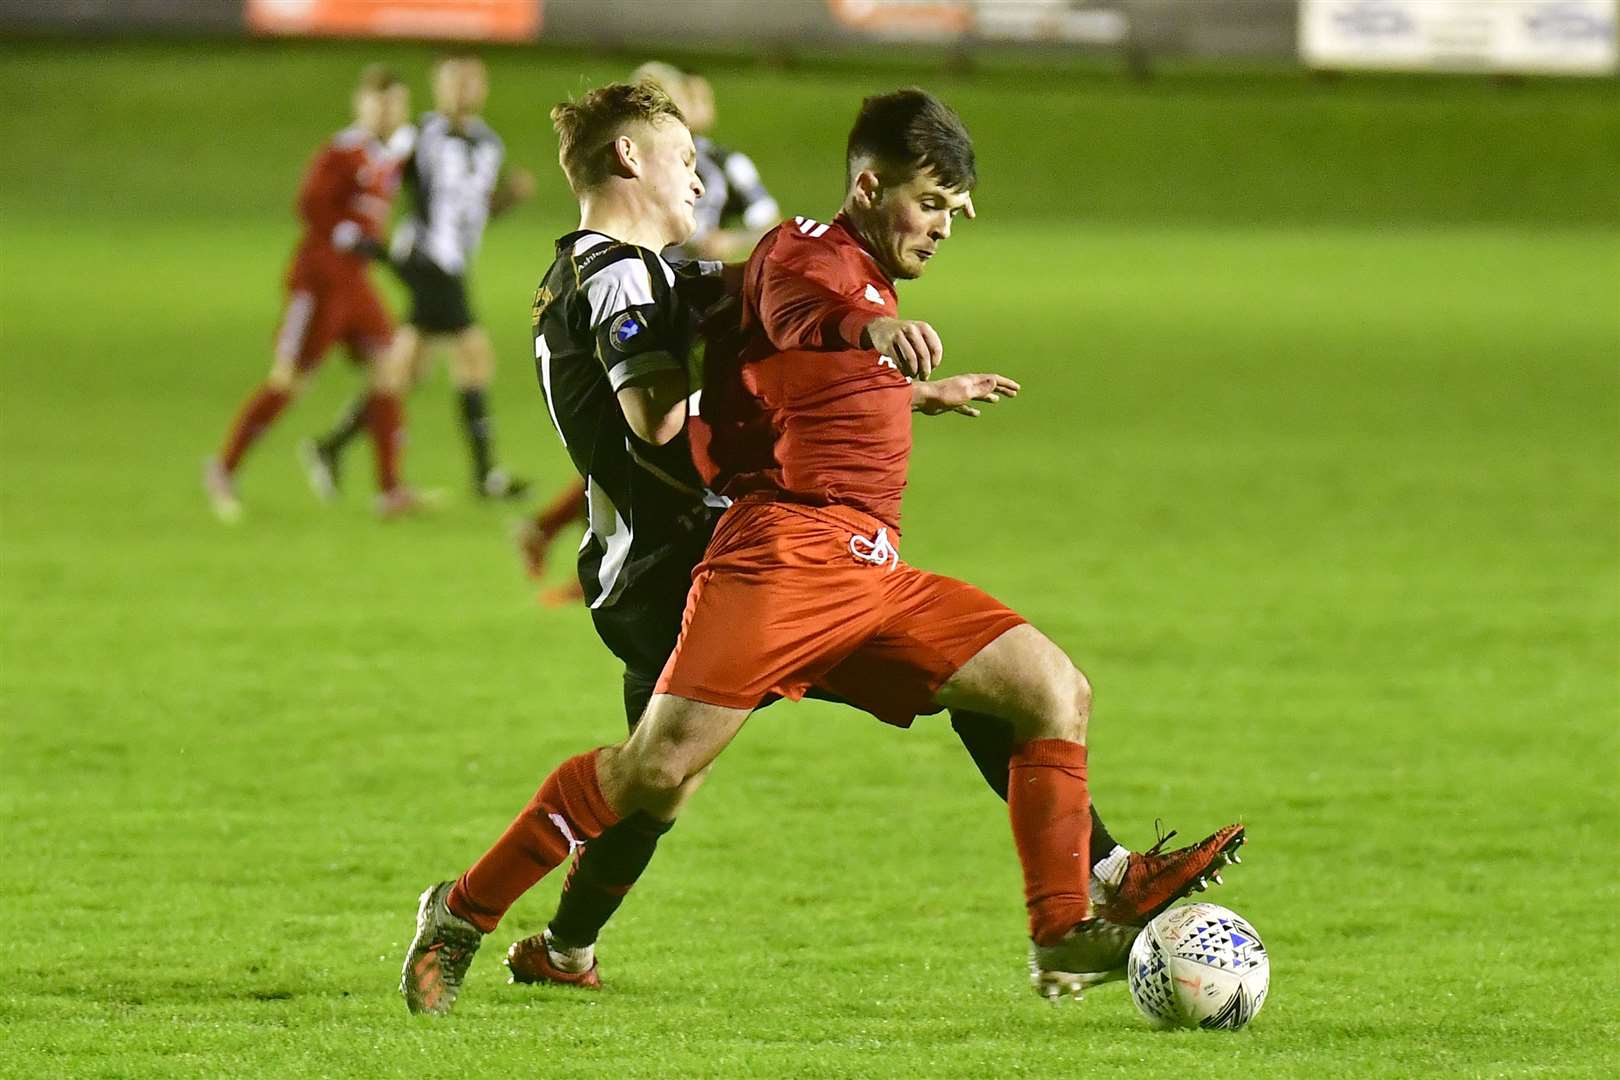 Thurso's Sean Campbell in action against Mark Macadie of Wick Academy in this week's Harmsworth Park friendly. Academy ran out 6-0 winners. Picture: Mel Roger